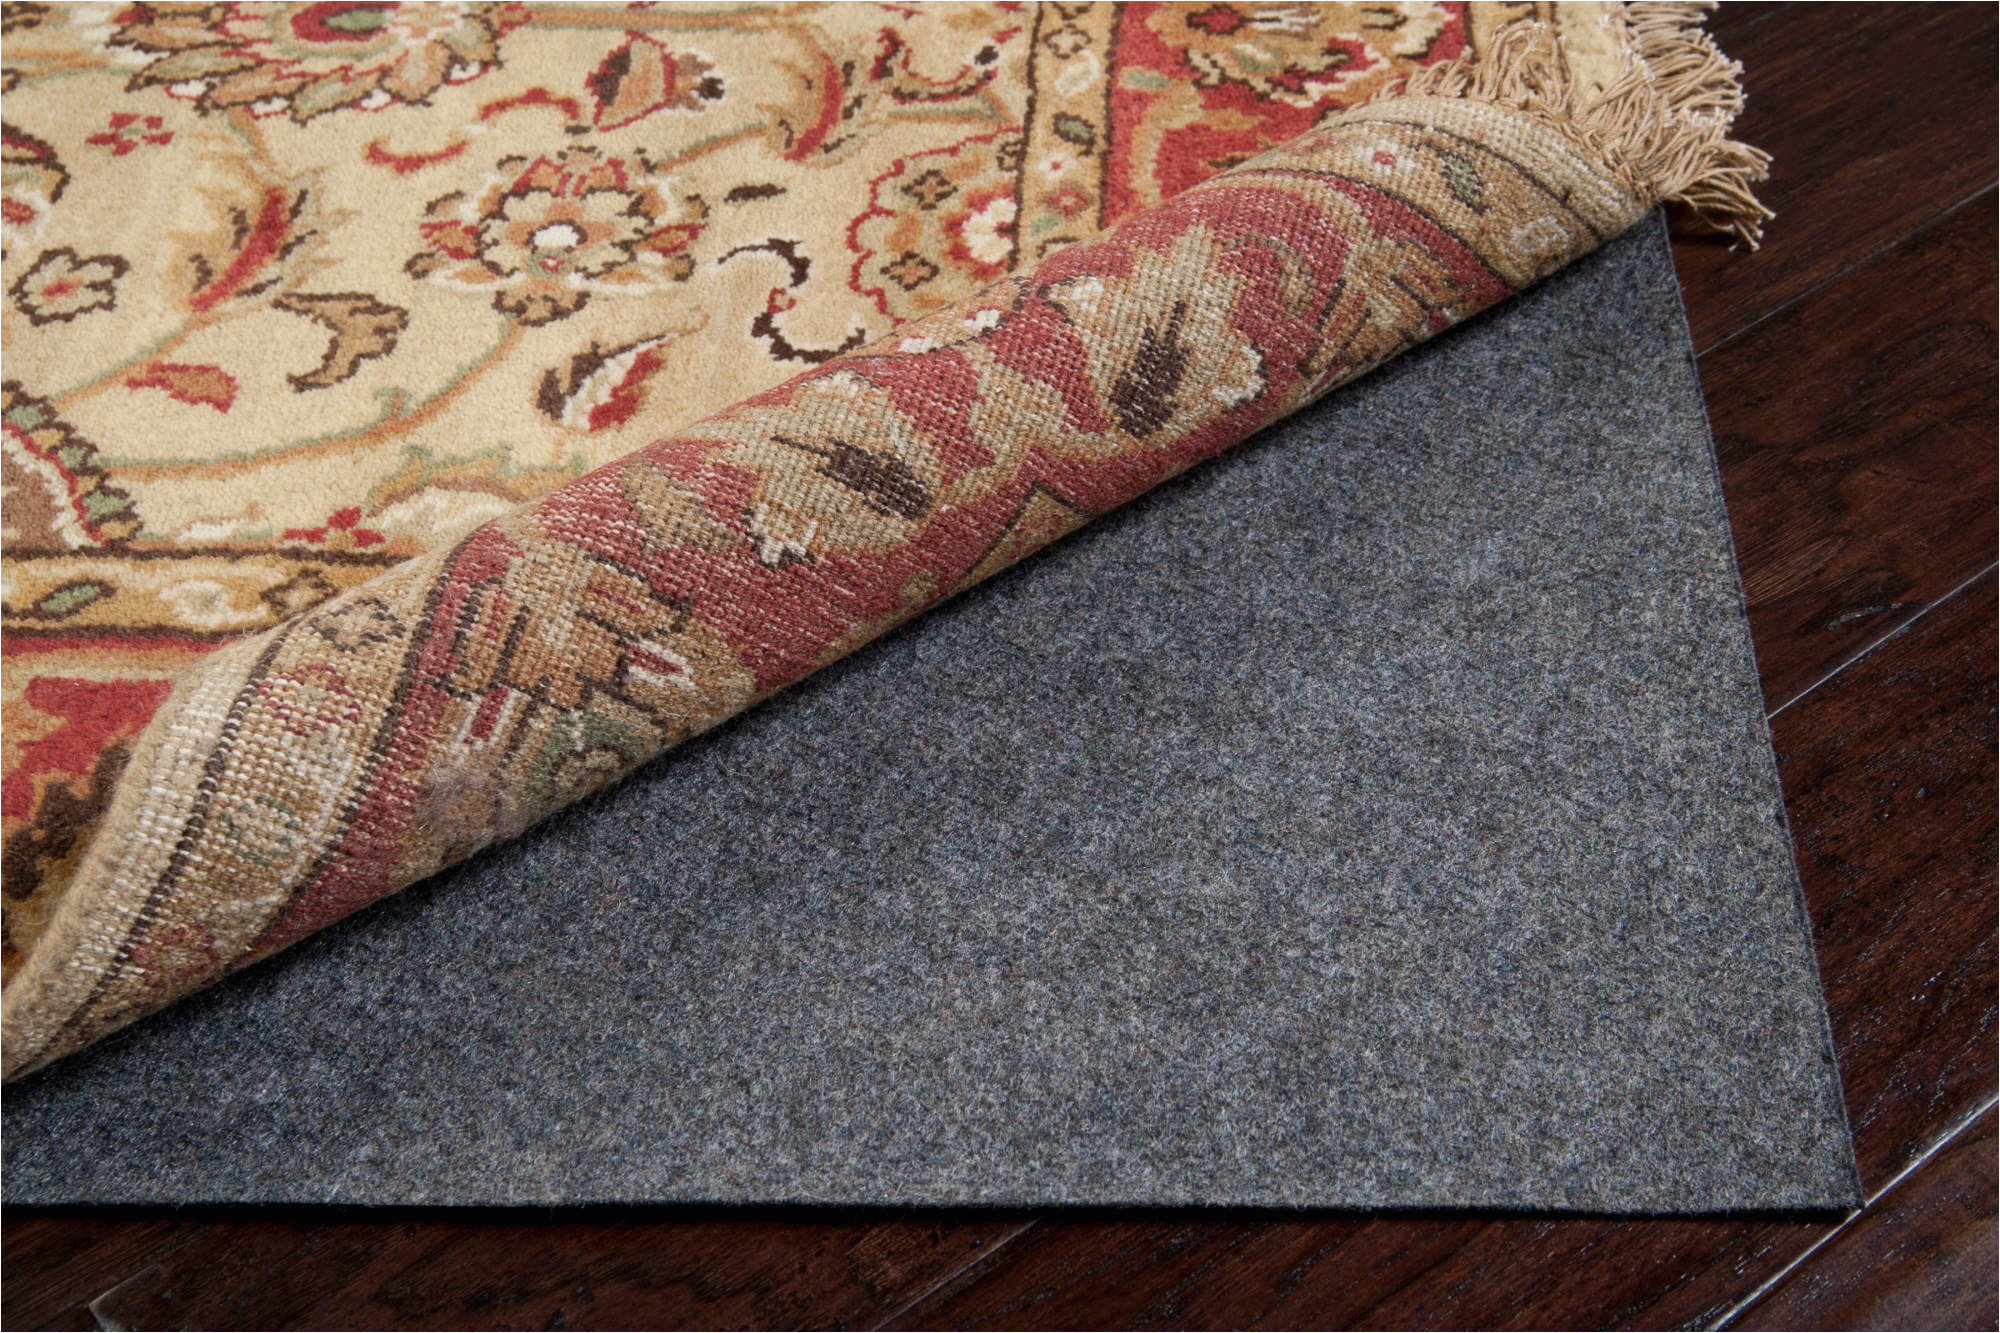 Mat for Under area Rug Surya Pads 810ov Grey Standard Felted Pad 8 X 10 Oval